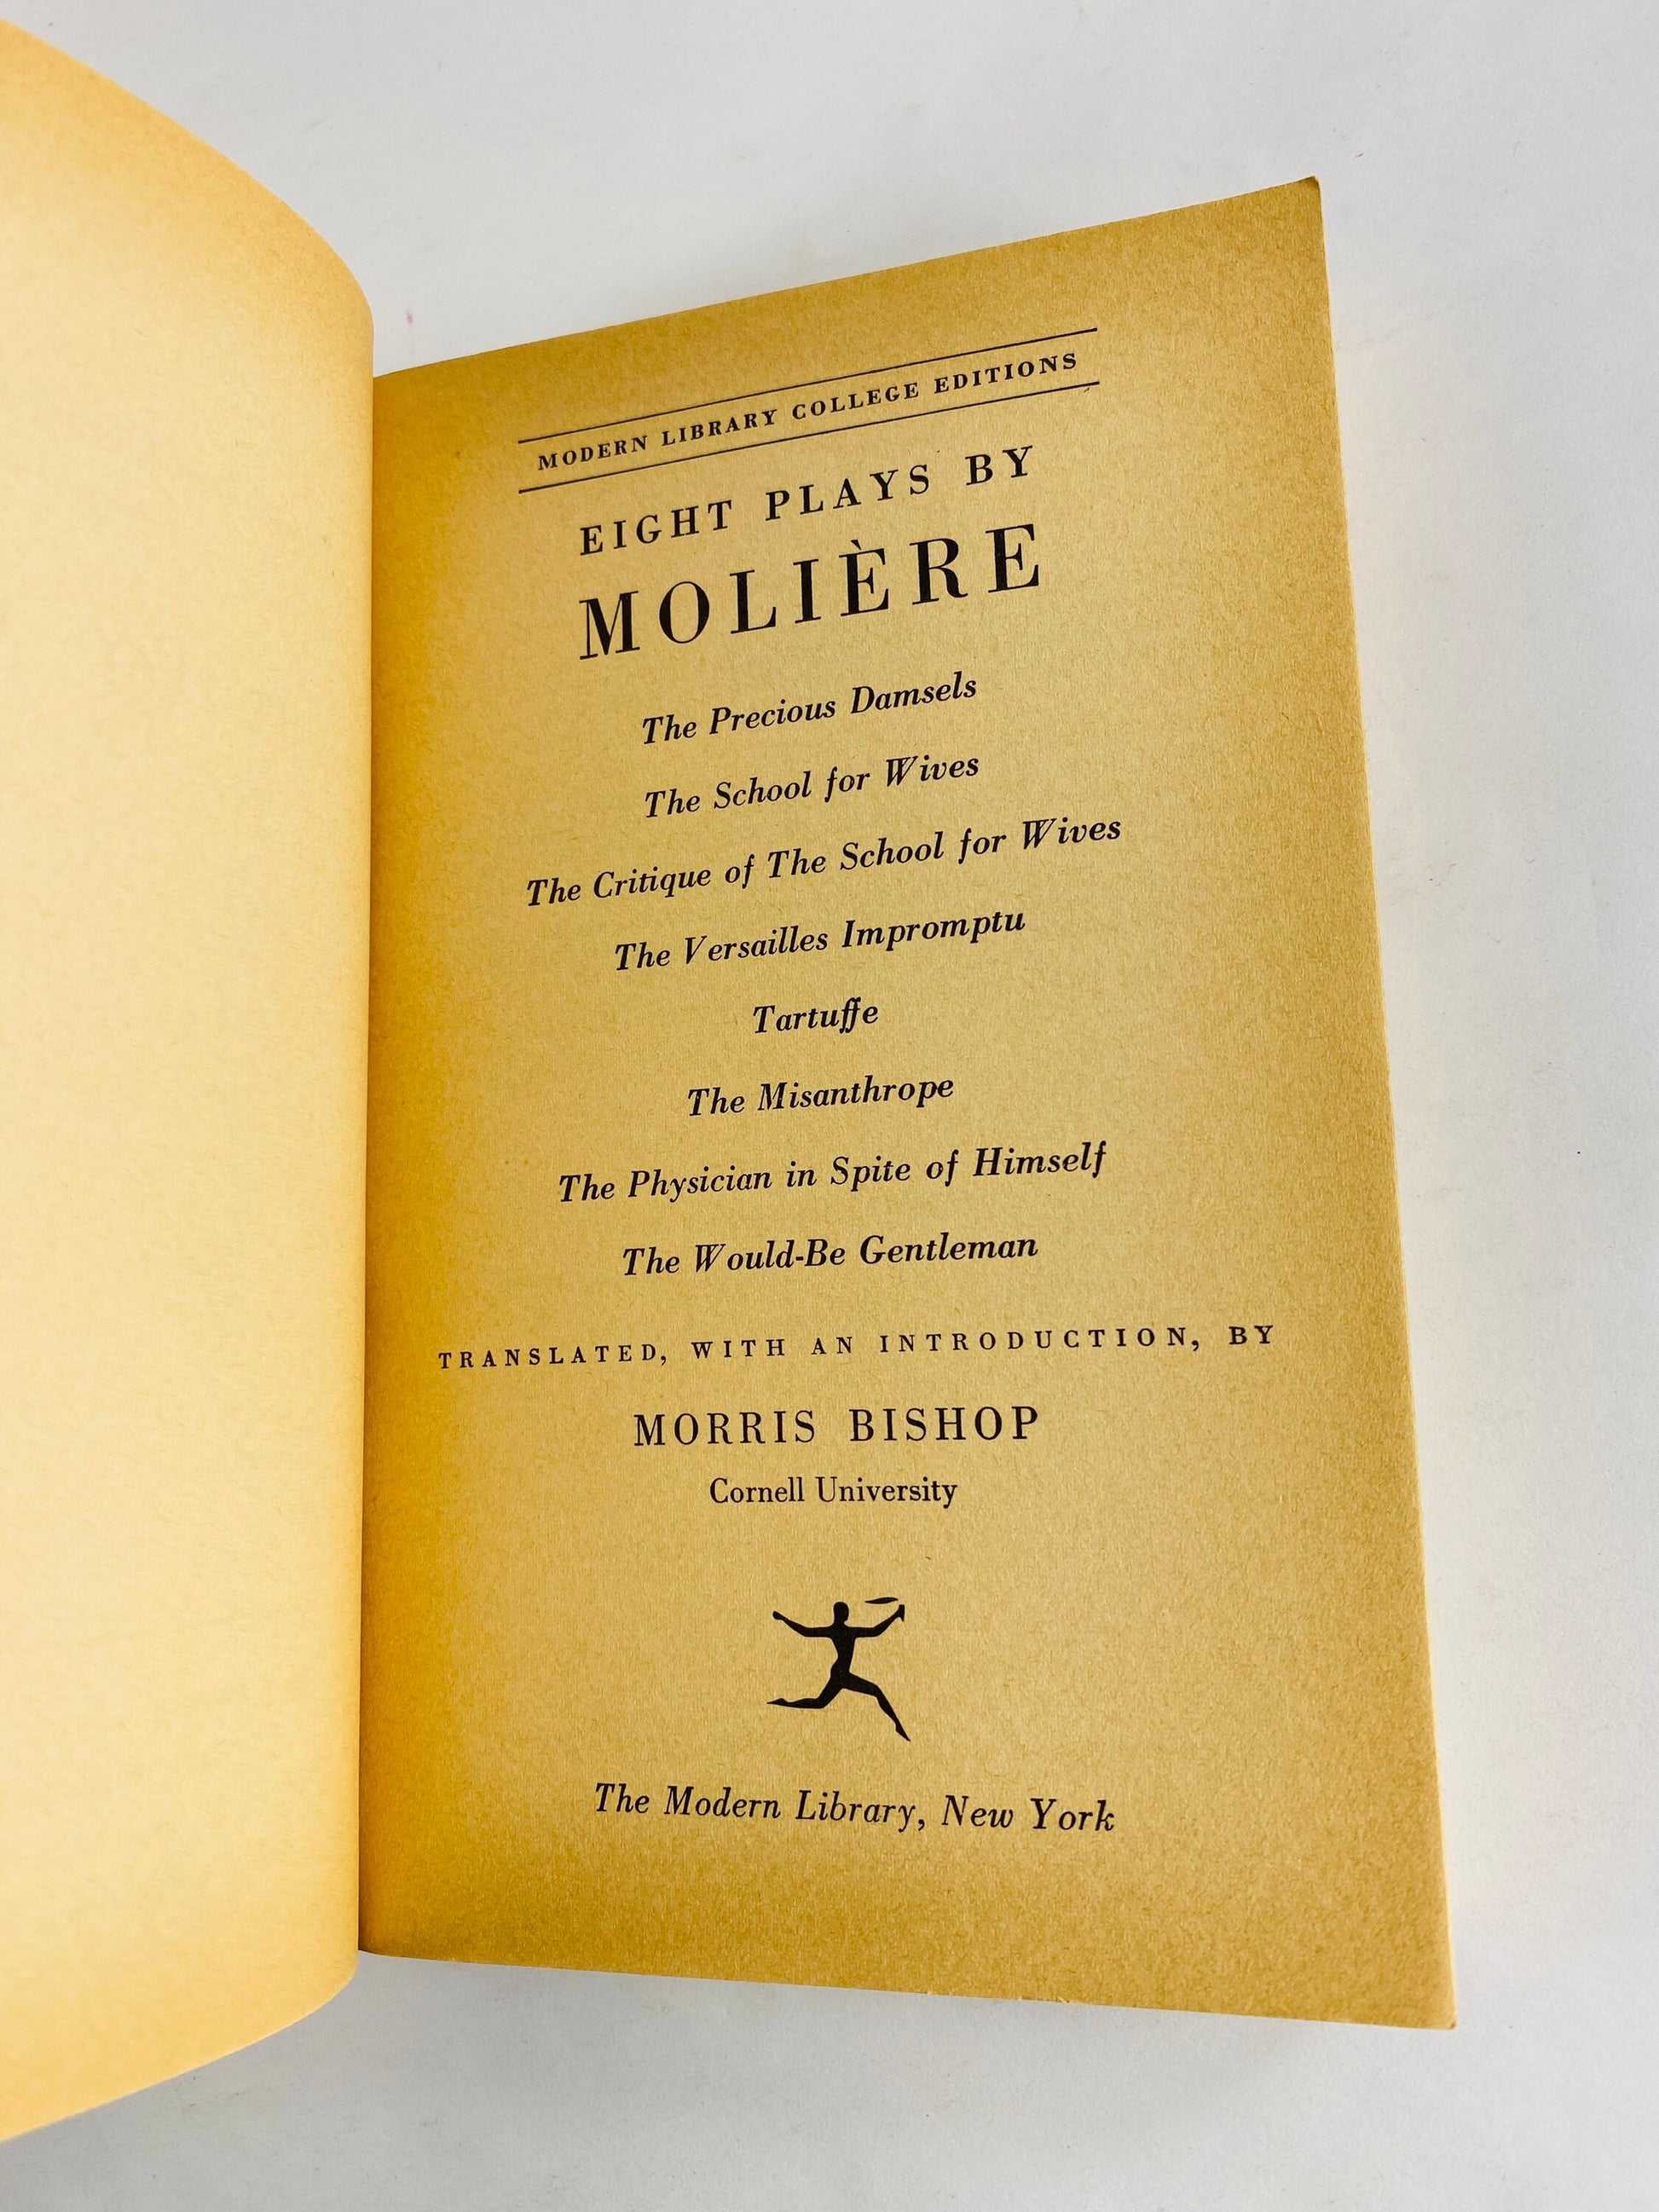 Moliere Plays Vintage Modern Library paperback book circa 1950 college edition. High Brow Ladies, School for Wives, Tartuffe, Miser